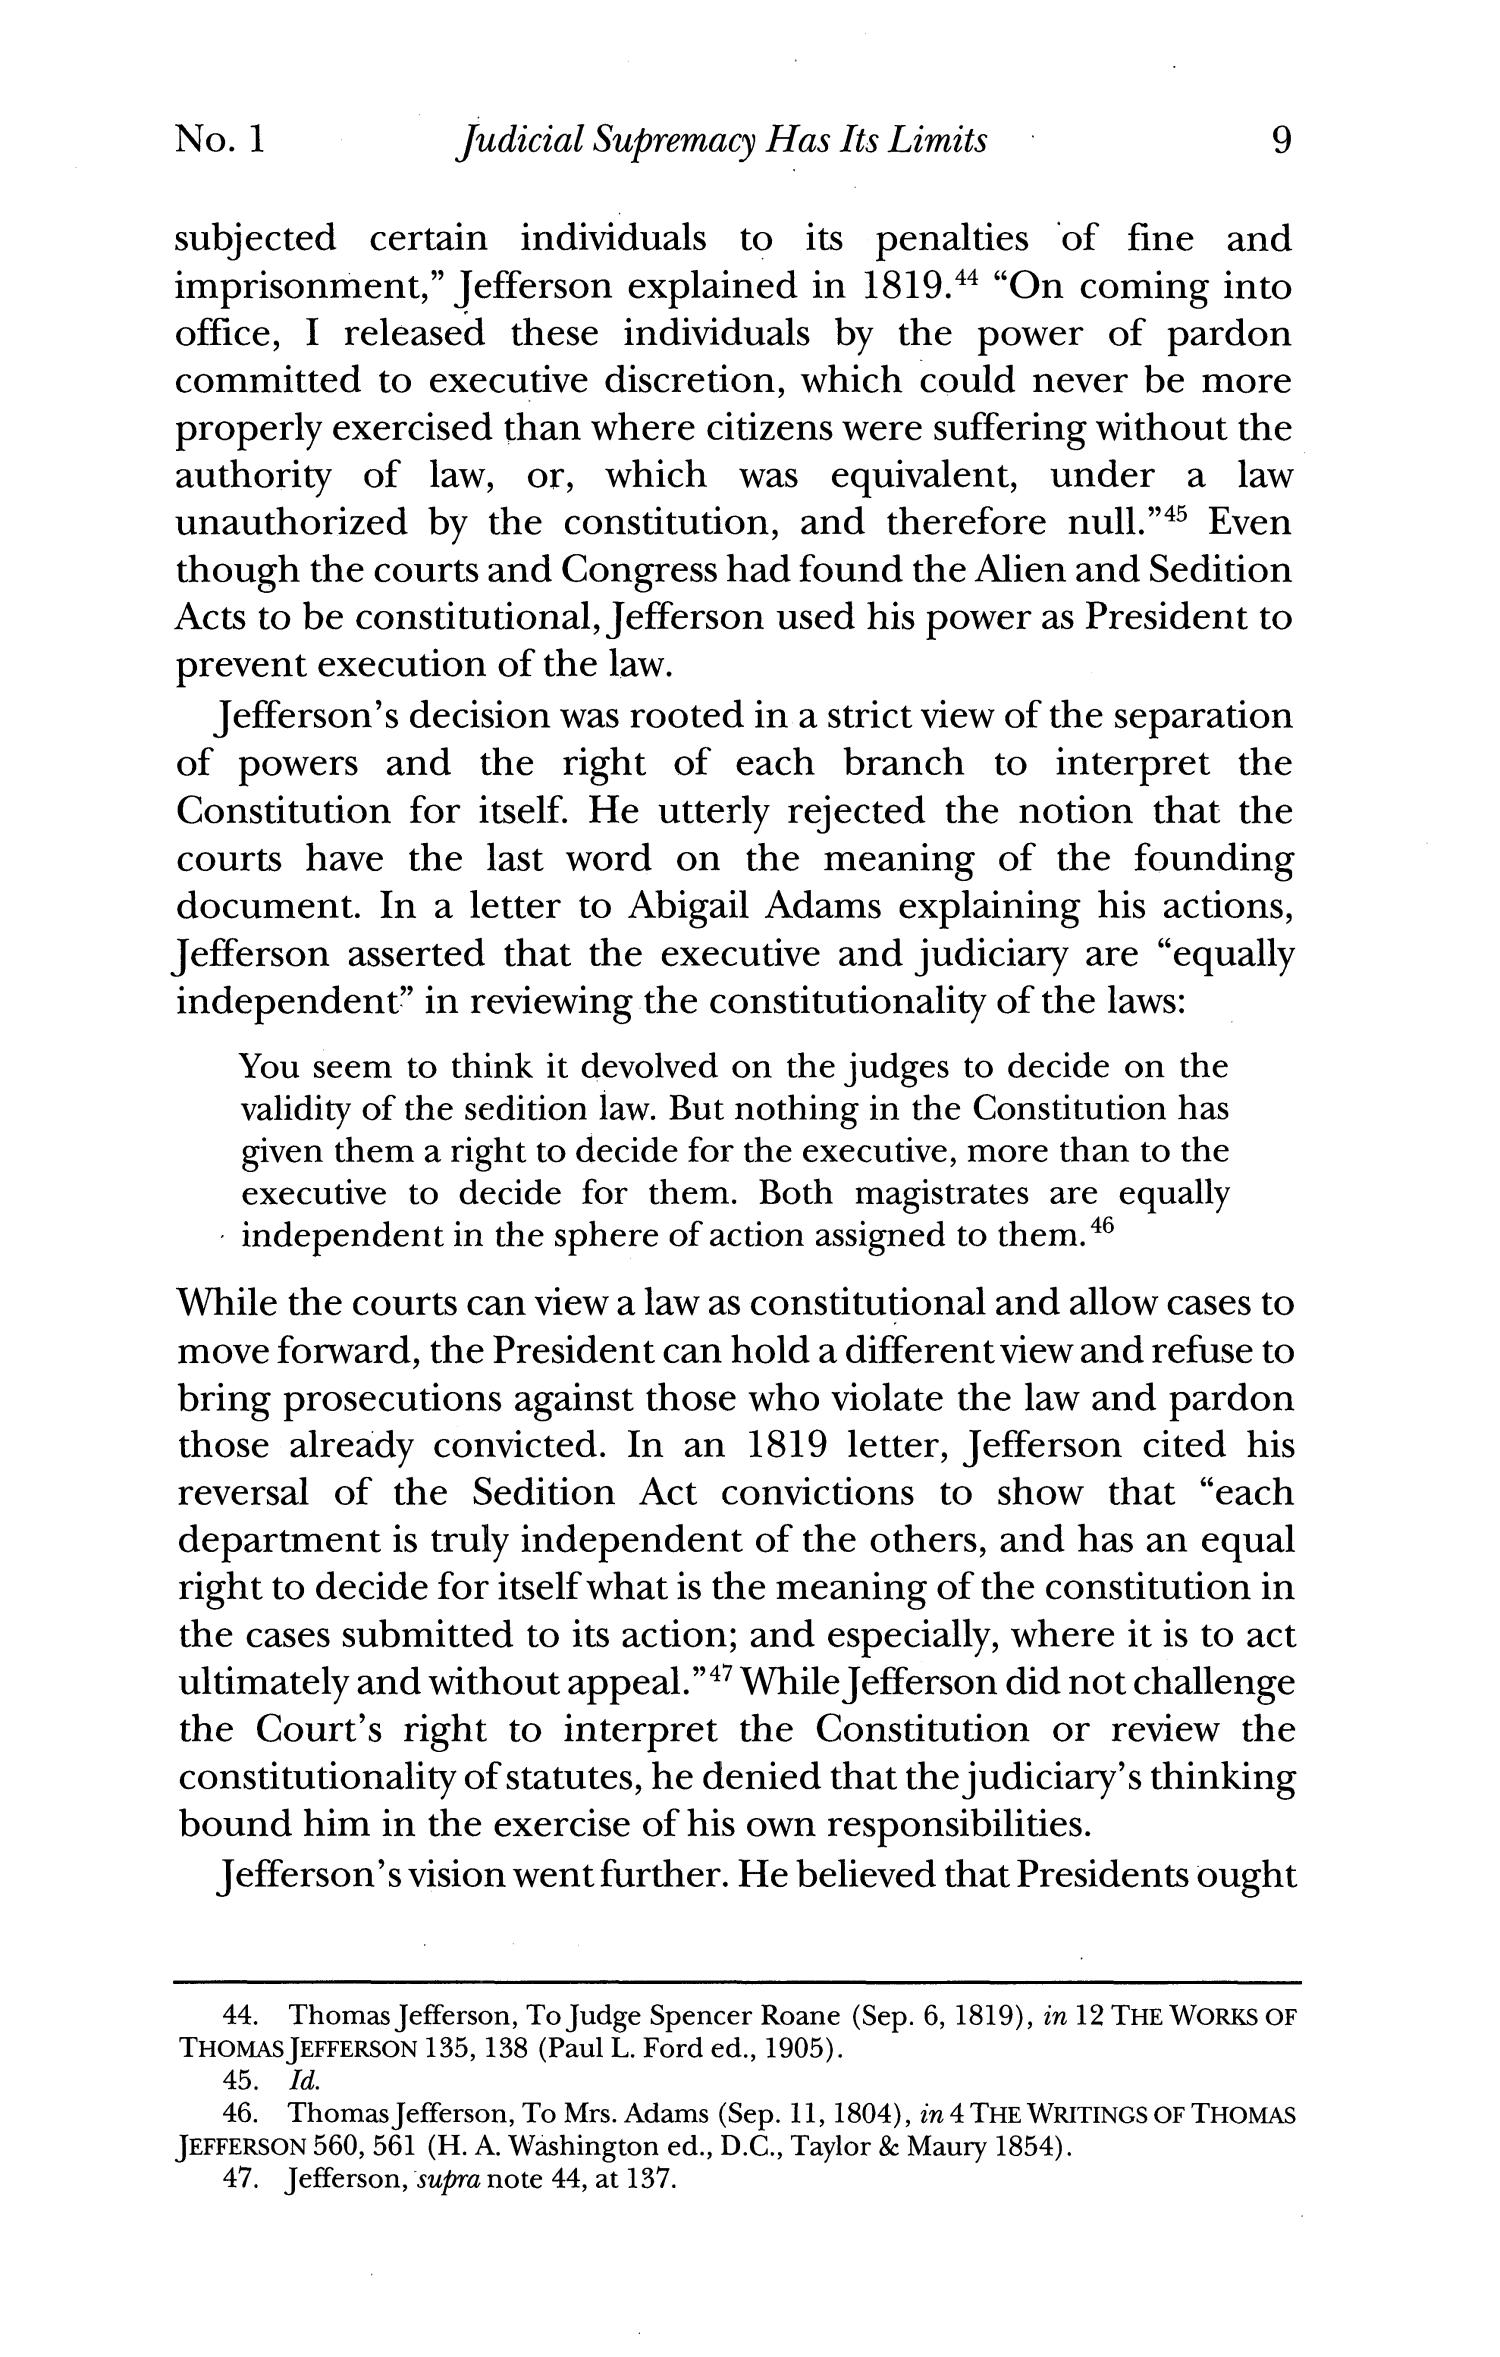 Texas Review of Law & Politics, Volume 20, Number 1, Fall 2015
                                                
                                                    9
                                                